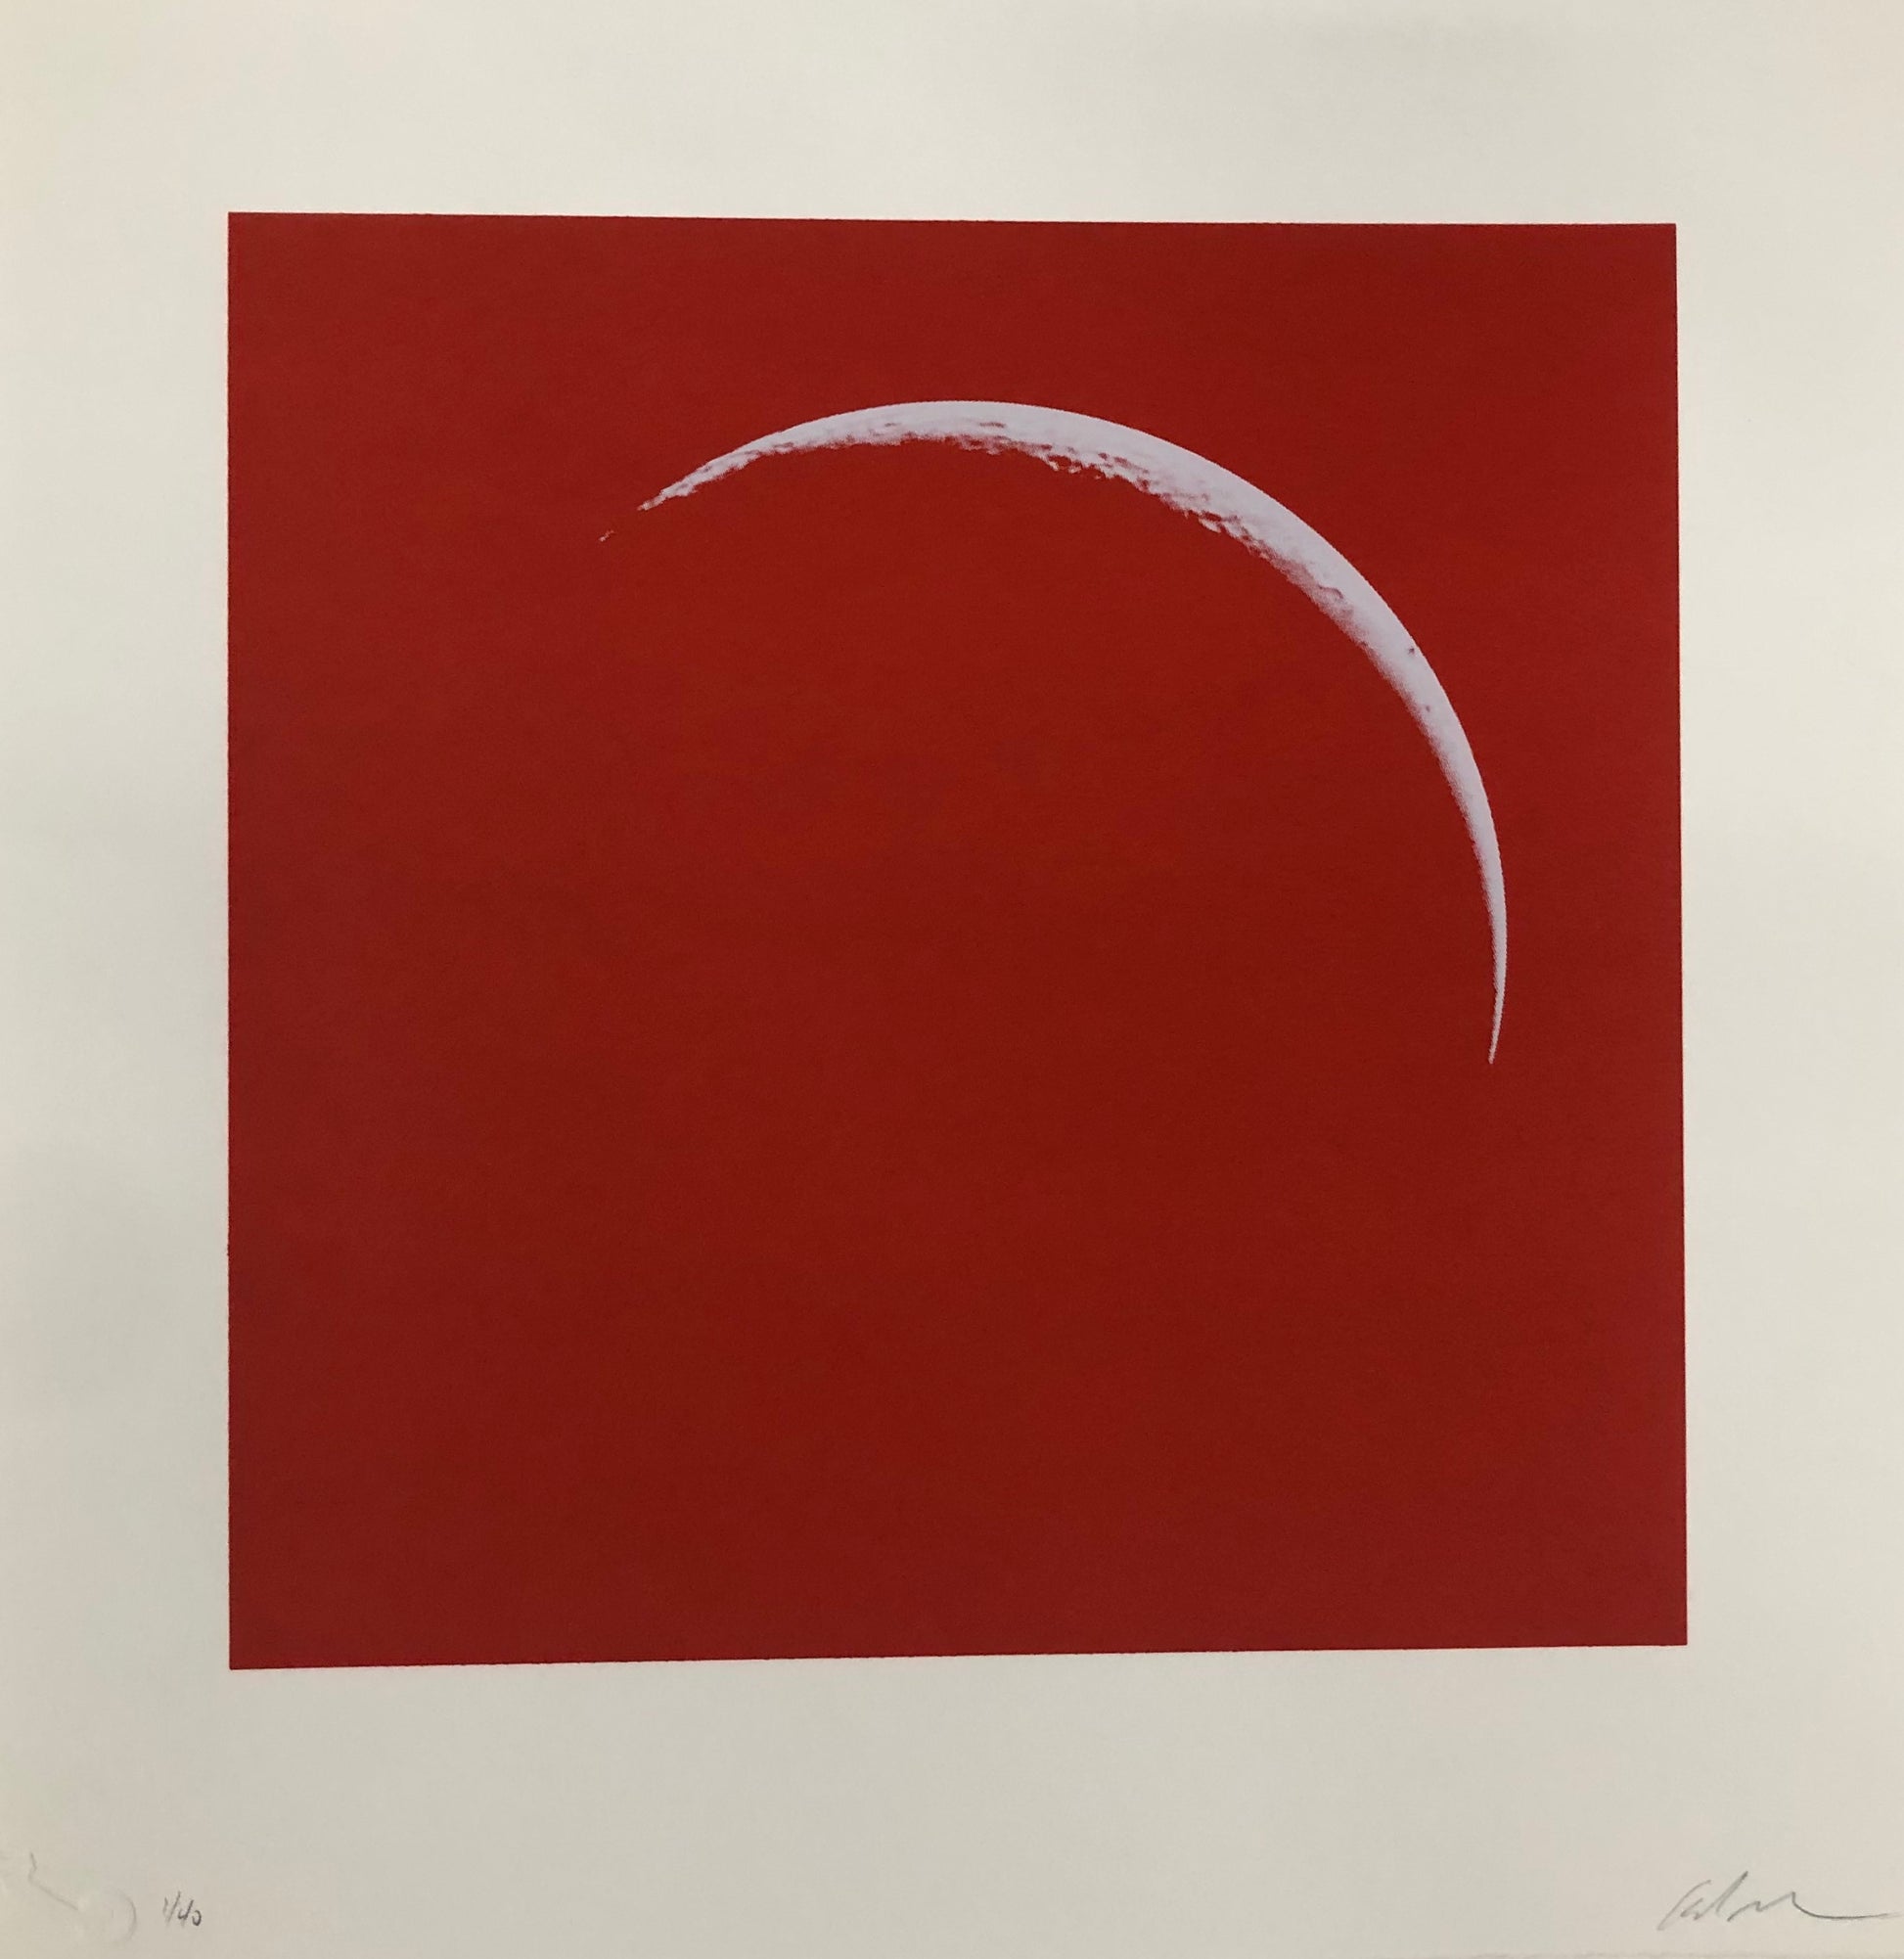 Moon Portraits - Crescent Moon - January 14, 2018 (Red) by Andy Gershon - Mourlot Editions - Fine_Art - Poster - Lithograph - Wall Art - Vintage - Prints - Original